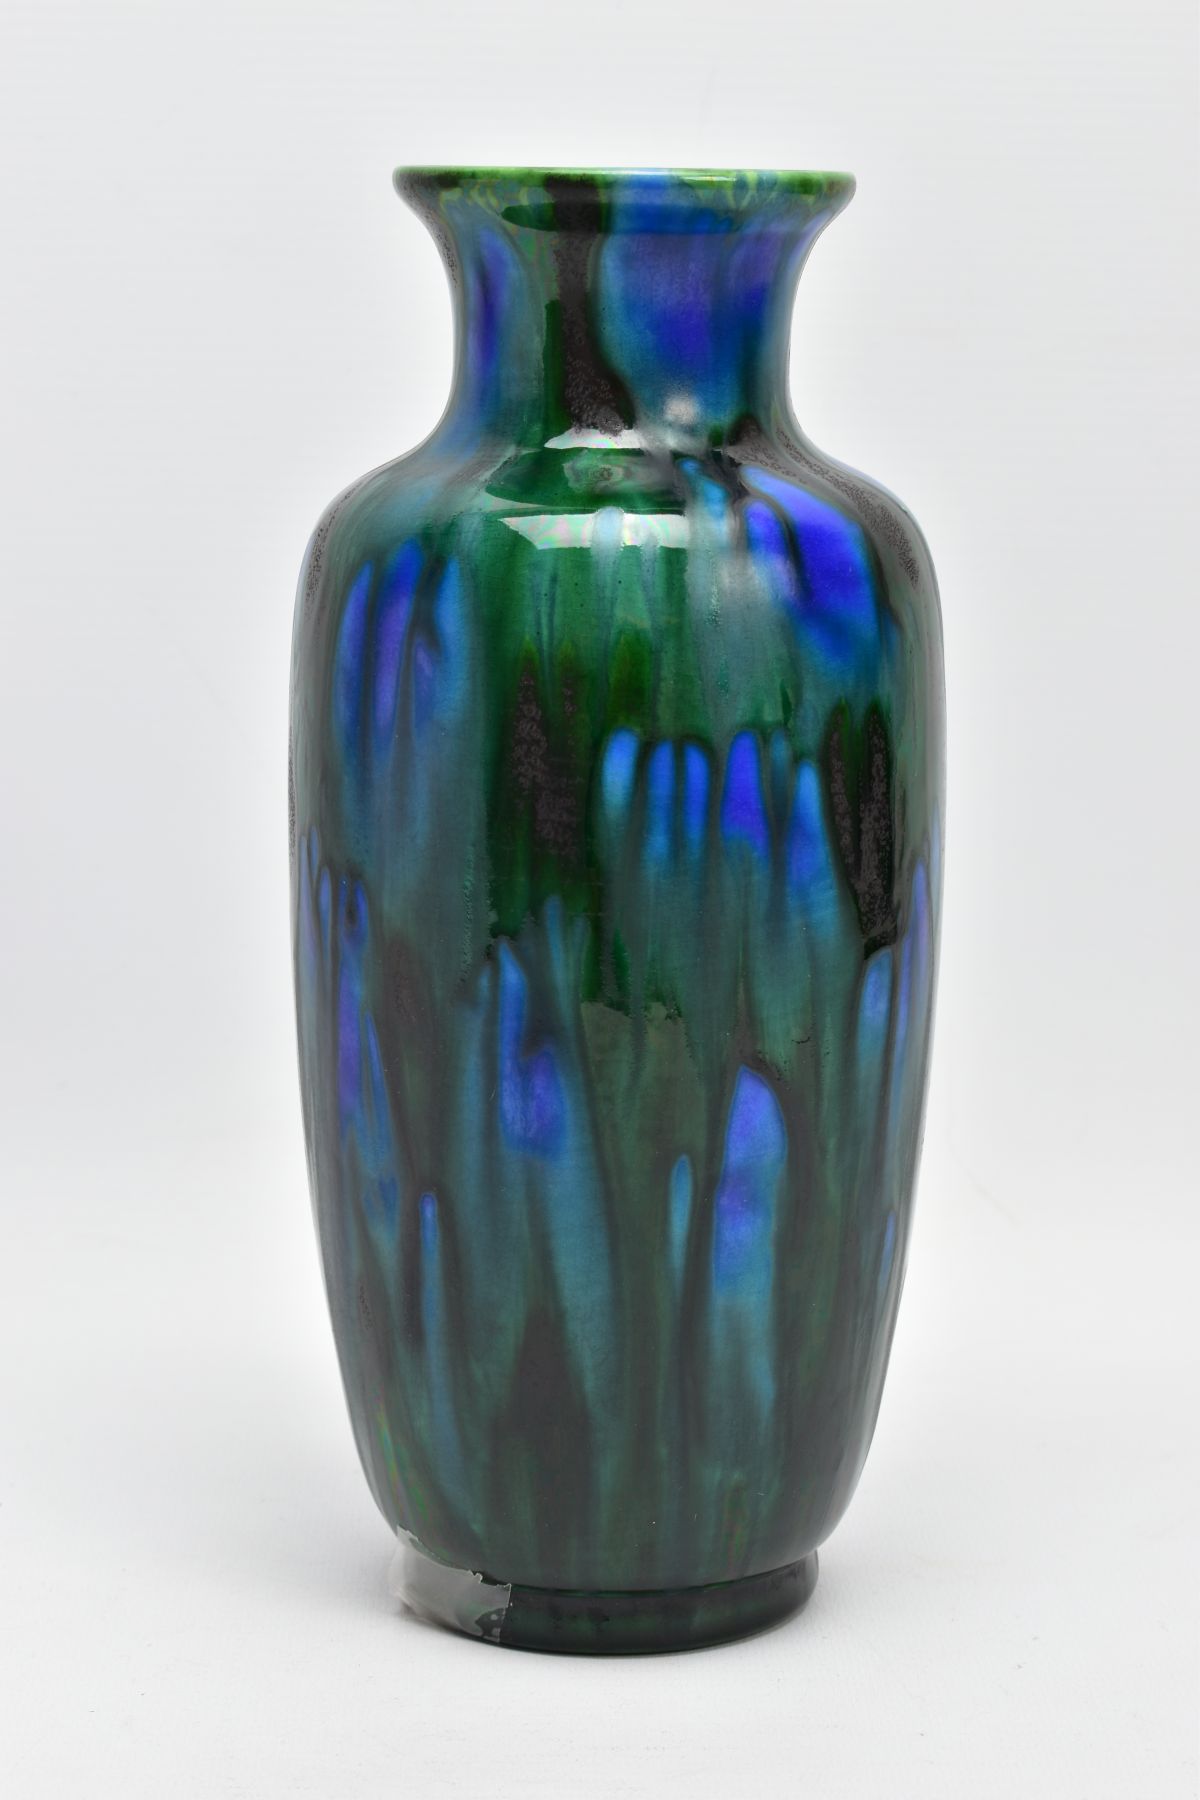 A MINTONS ASTRAWARE VASE, glazed in streaky blue and green, printed factory mark, height 10.5cm - Image 2 of 5